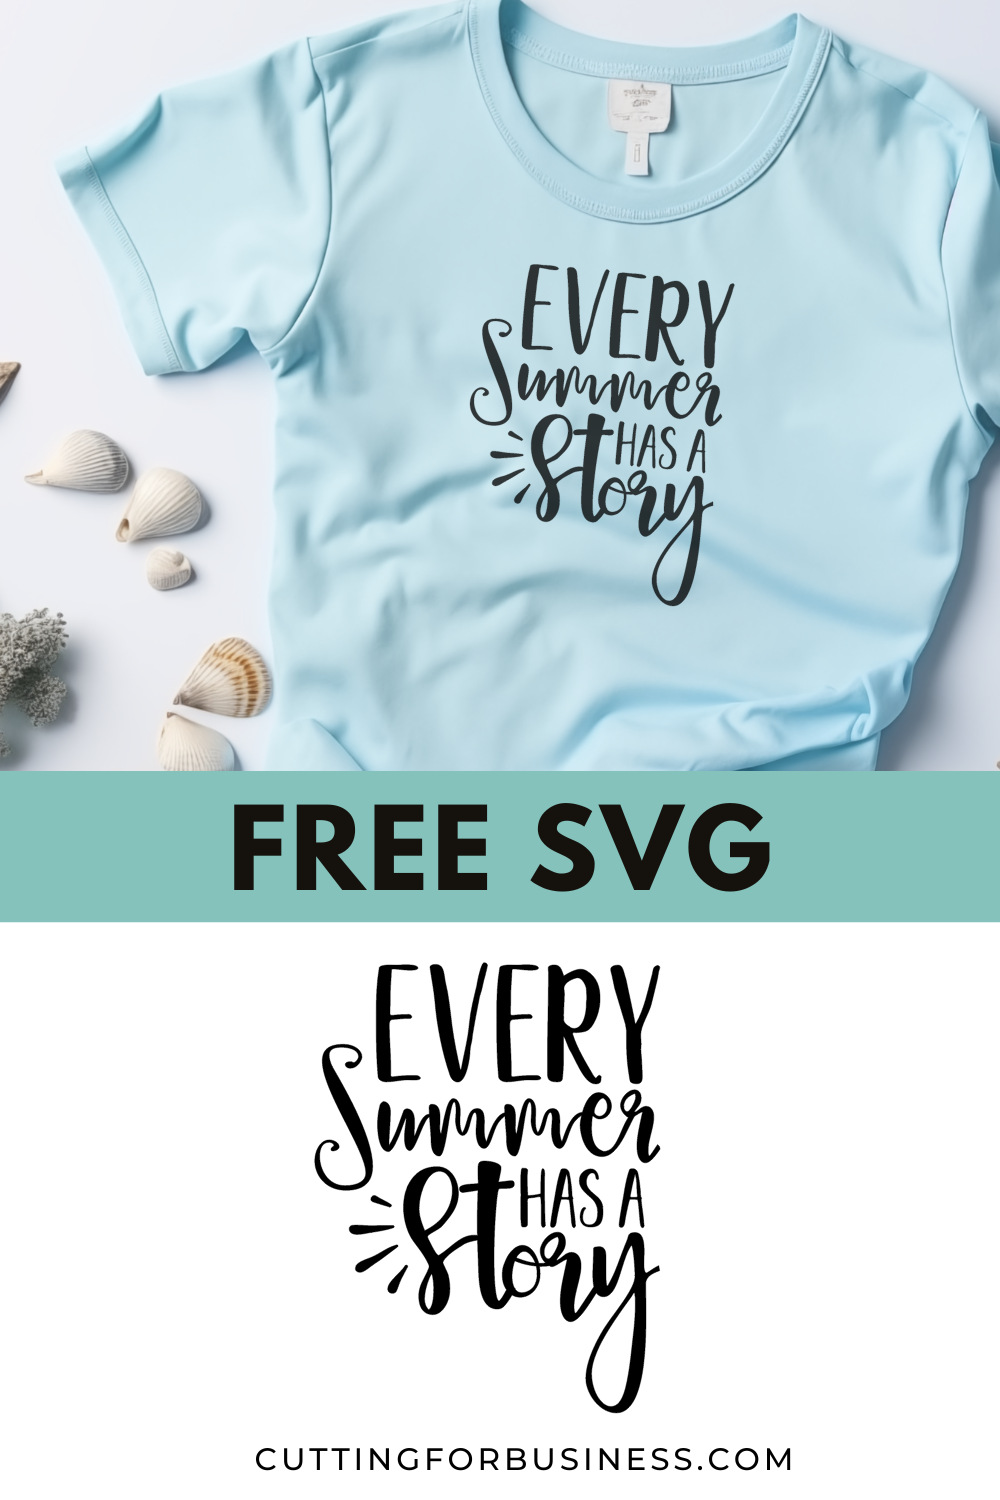 Free SVG - Every Summer Has a Story - cuttingforbusiness.com